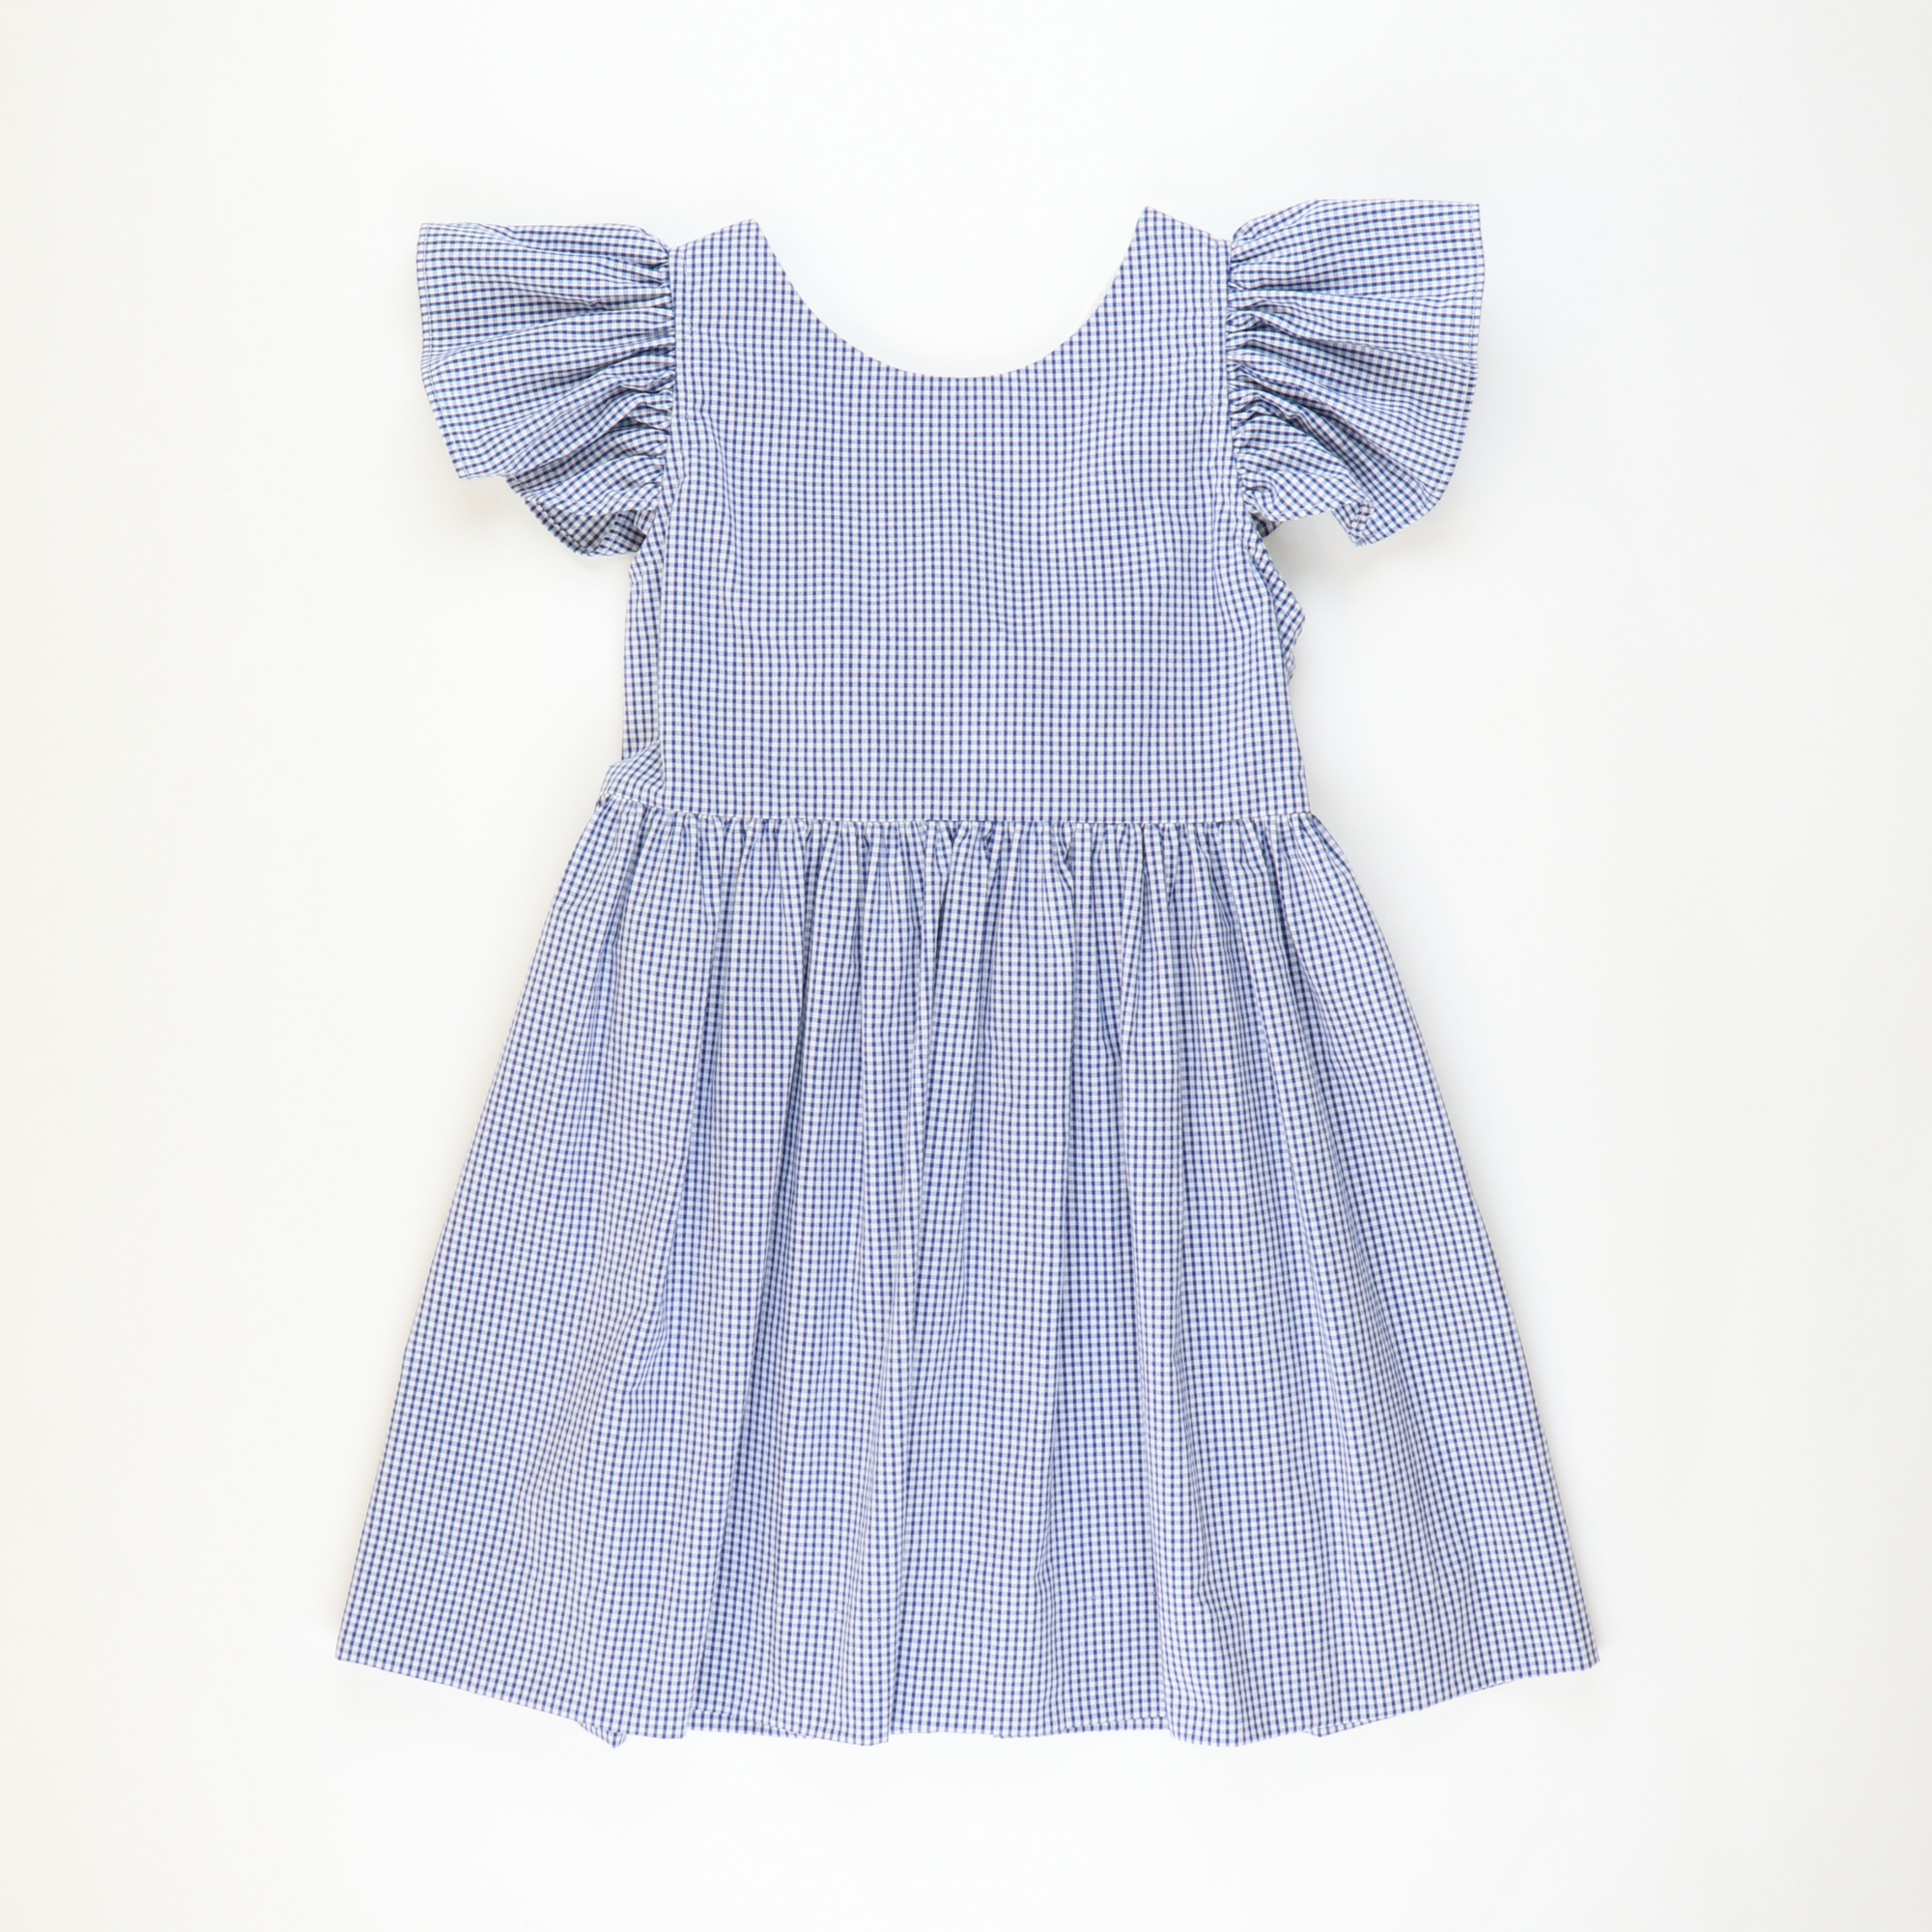 Bow Pinafore Dress - Royal Blue Check Seersucker - Stellybelly